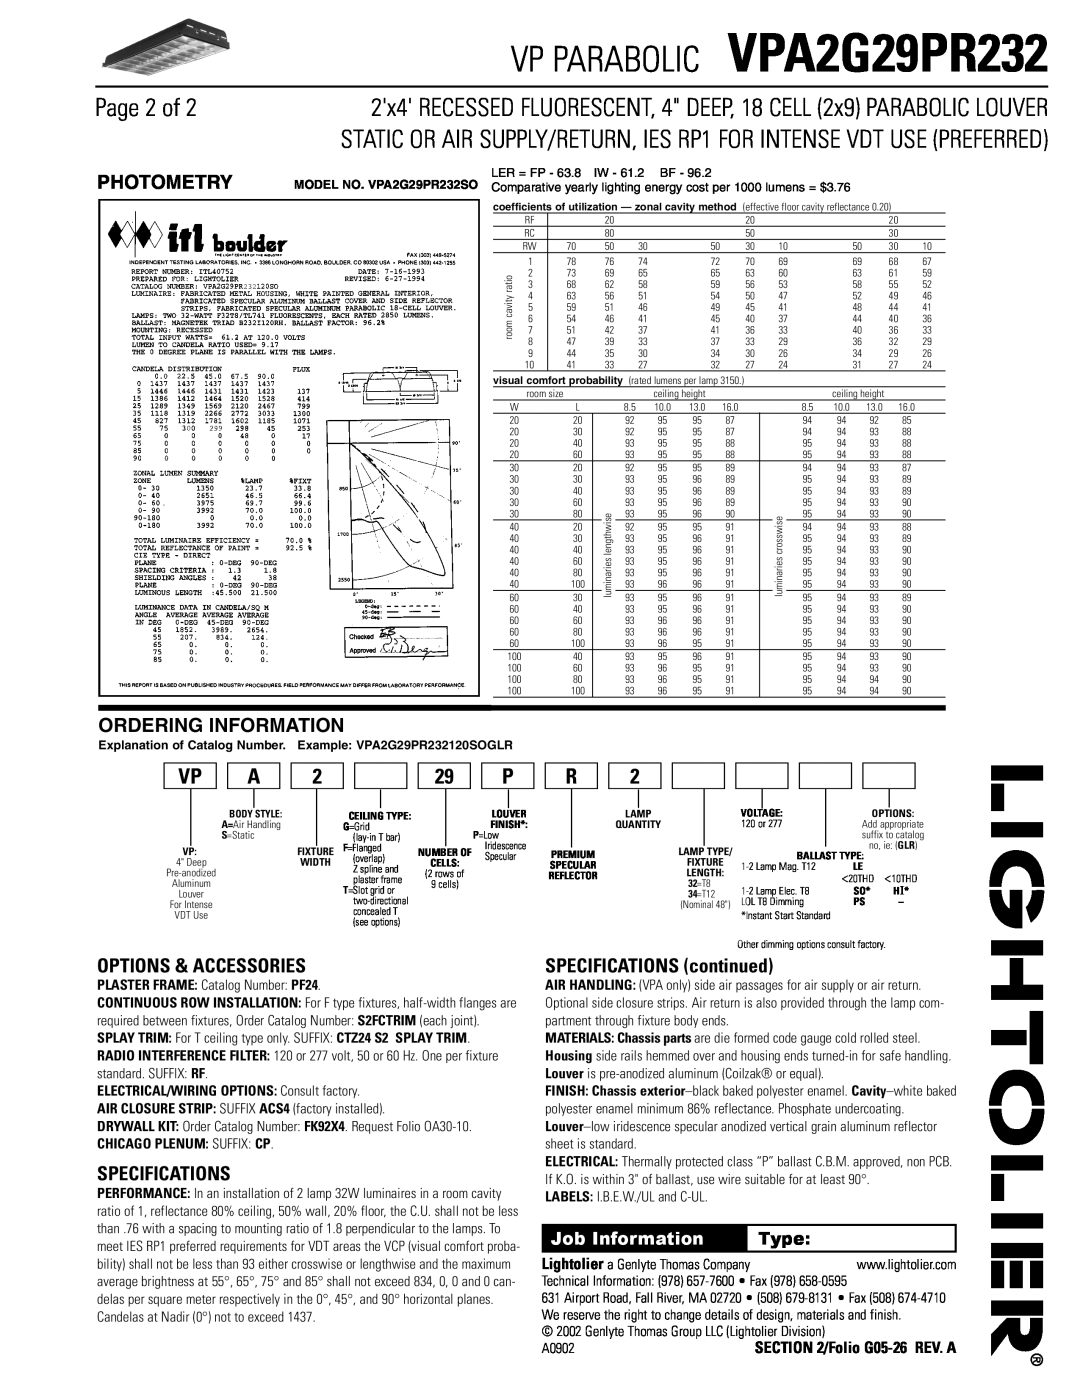 Lightolier VPA2G29PR232 dimensions Page 2 of, Options & Accessories, Specifications, SPECIFICATIONS continued, Photometry 